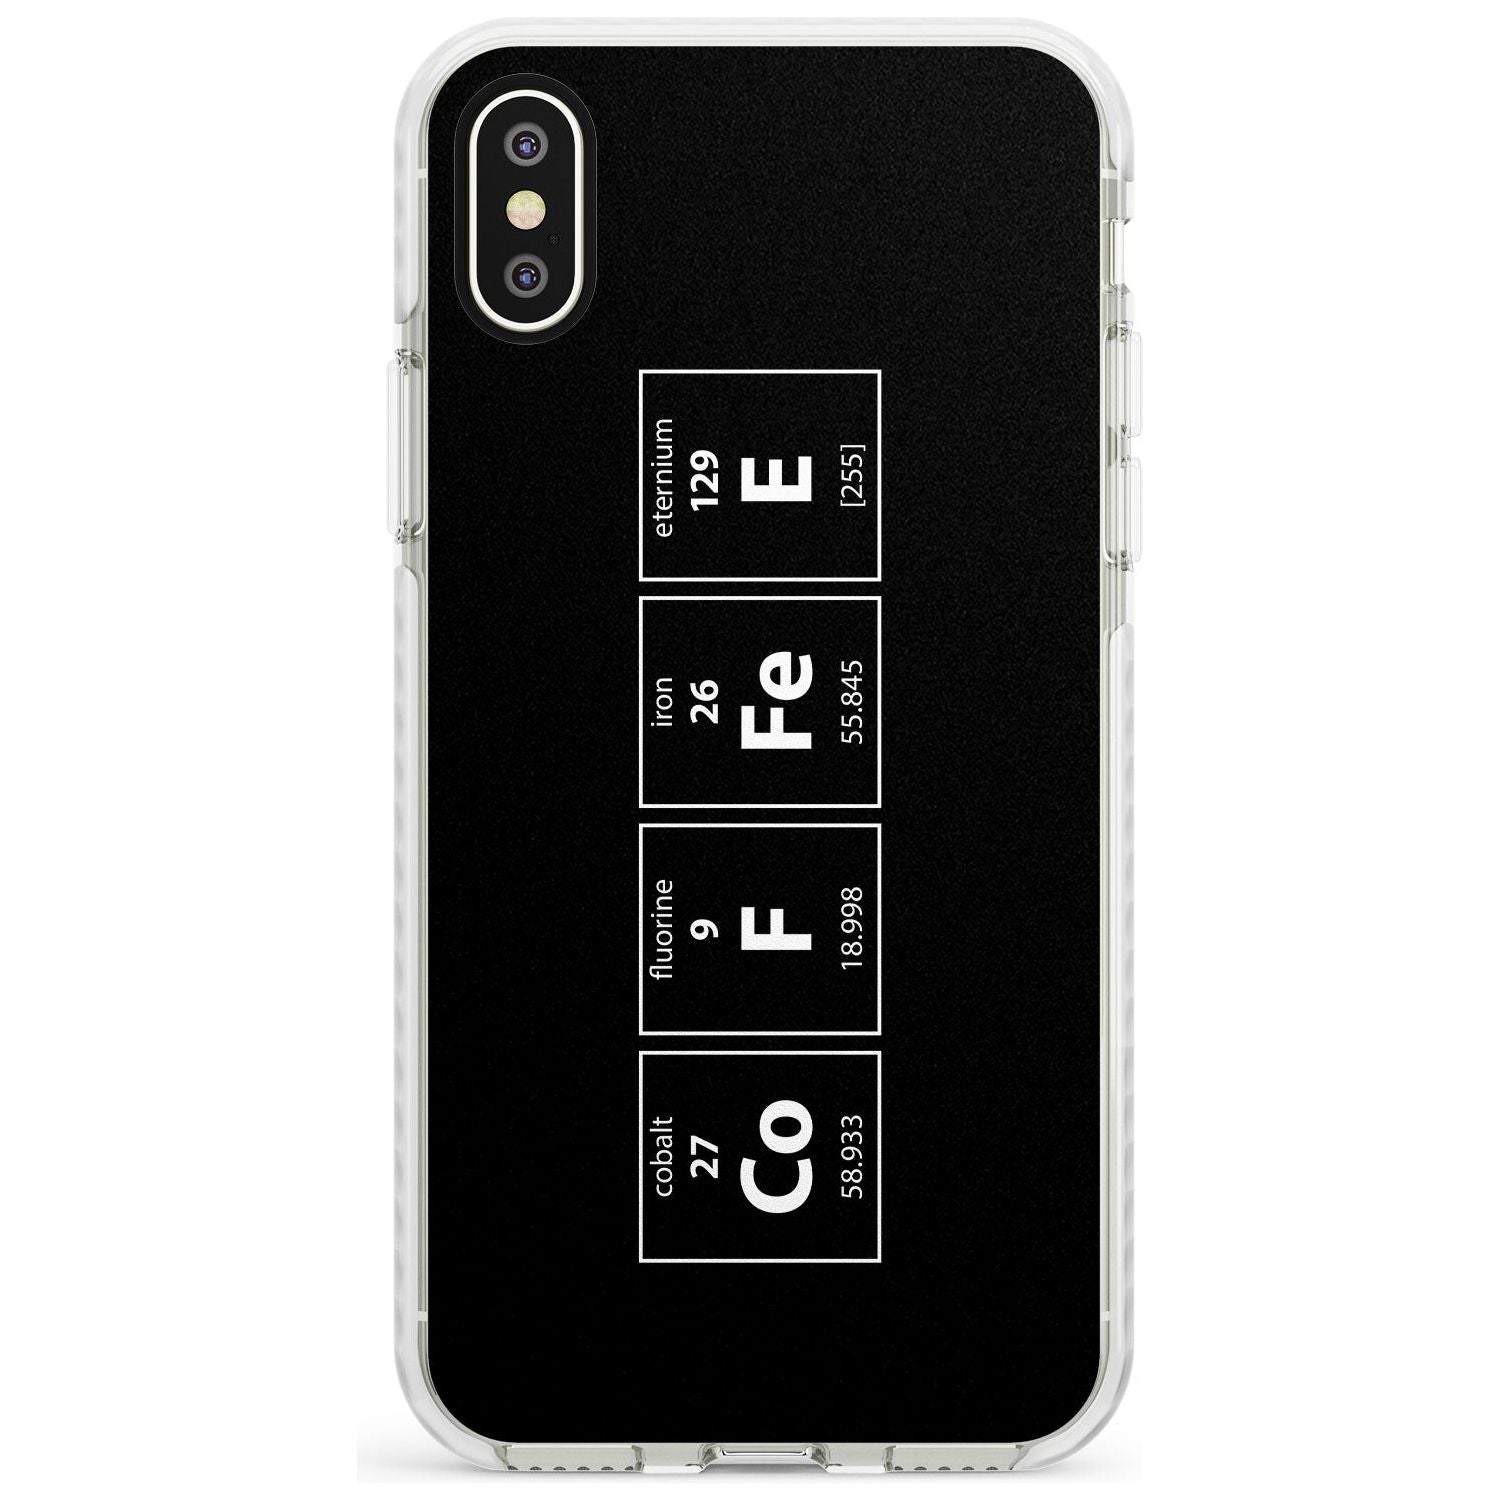 Coffee Element (Black) Impact Phone Case for iPhone X XS Max XR